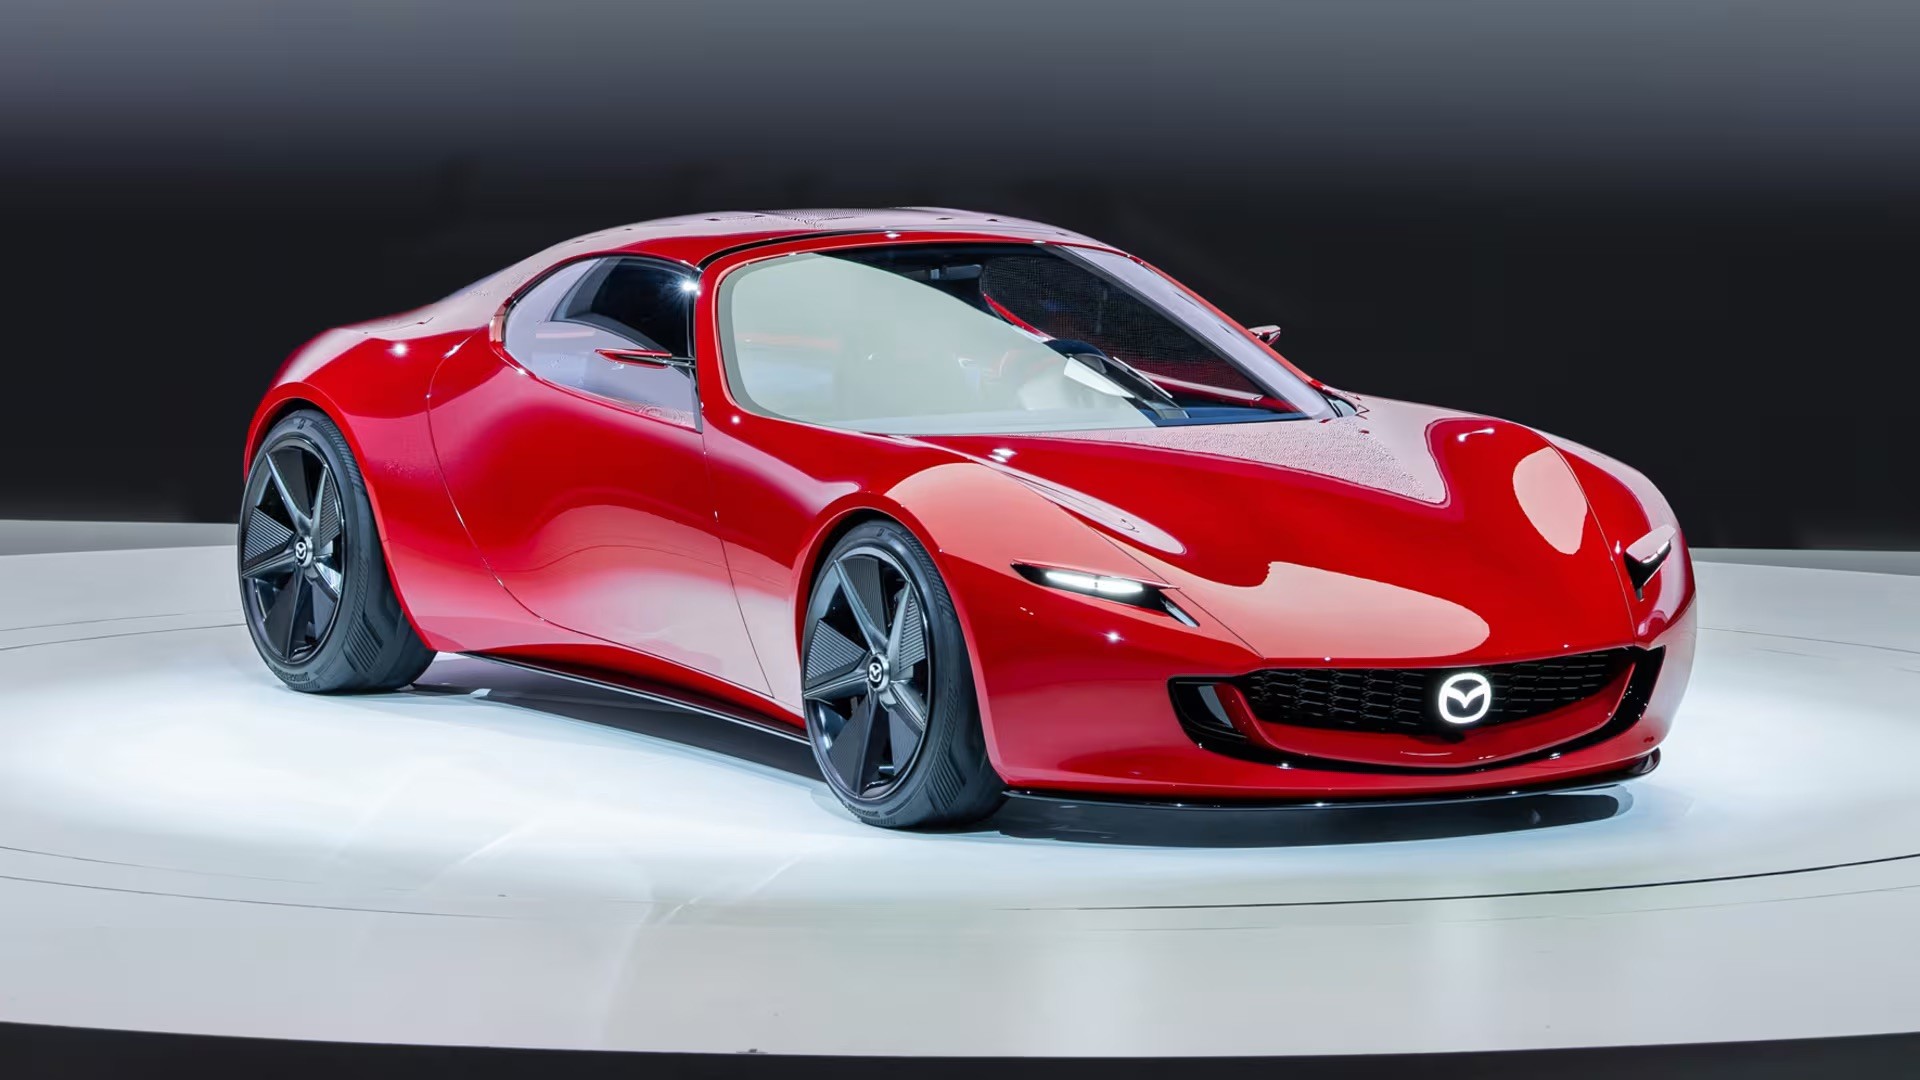 Mazda Confirms Development of a New Rotary Engine for Powering its Future Sports Car